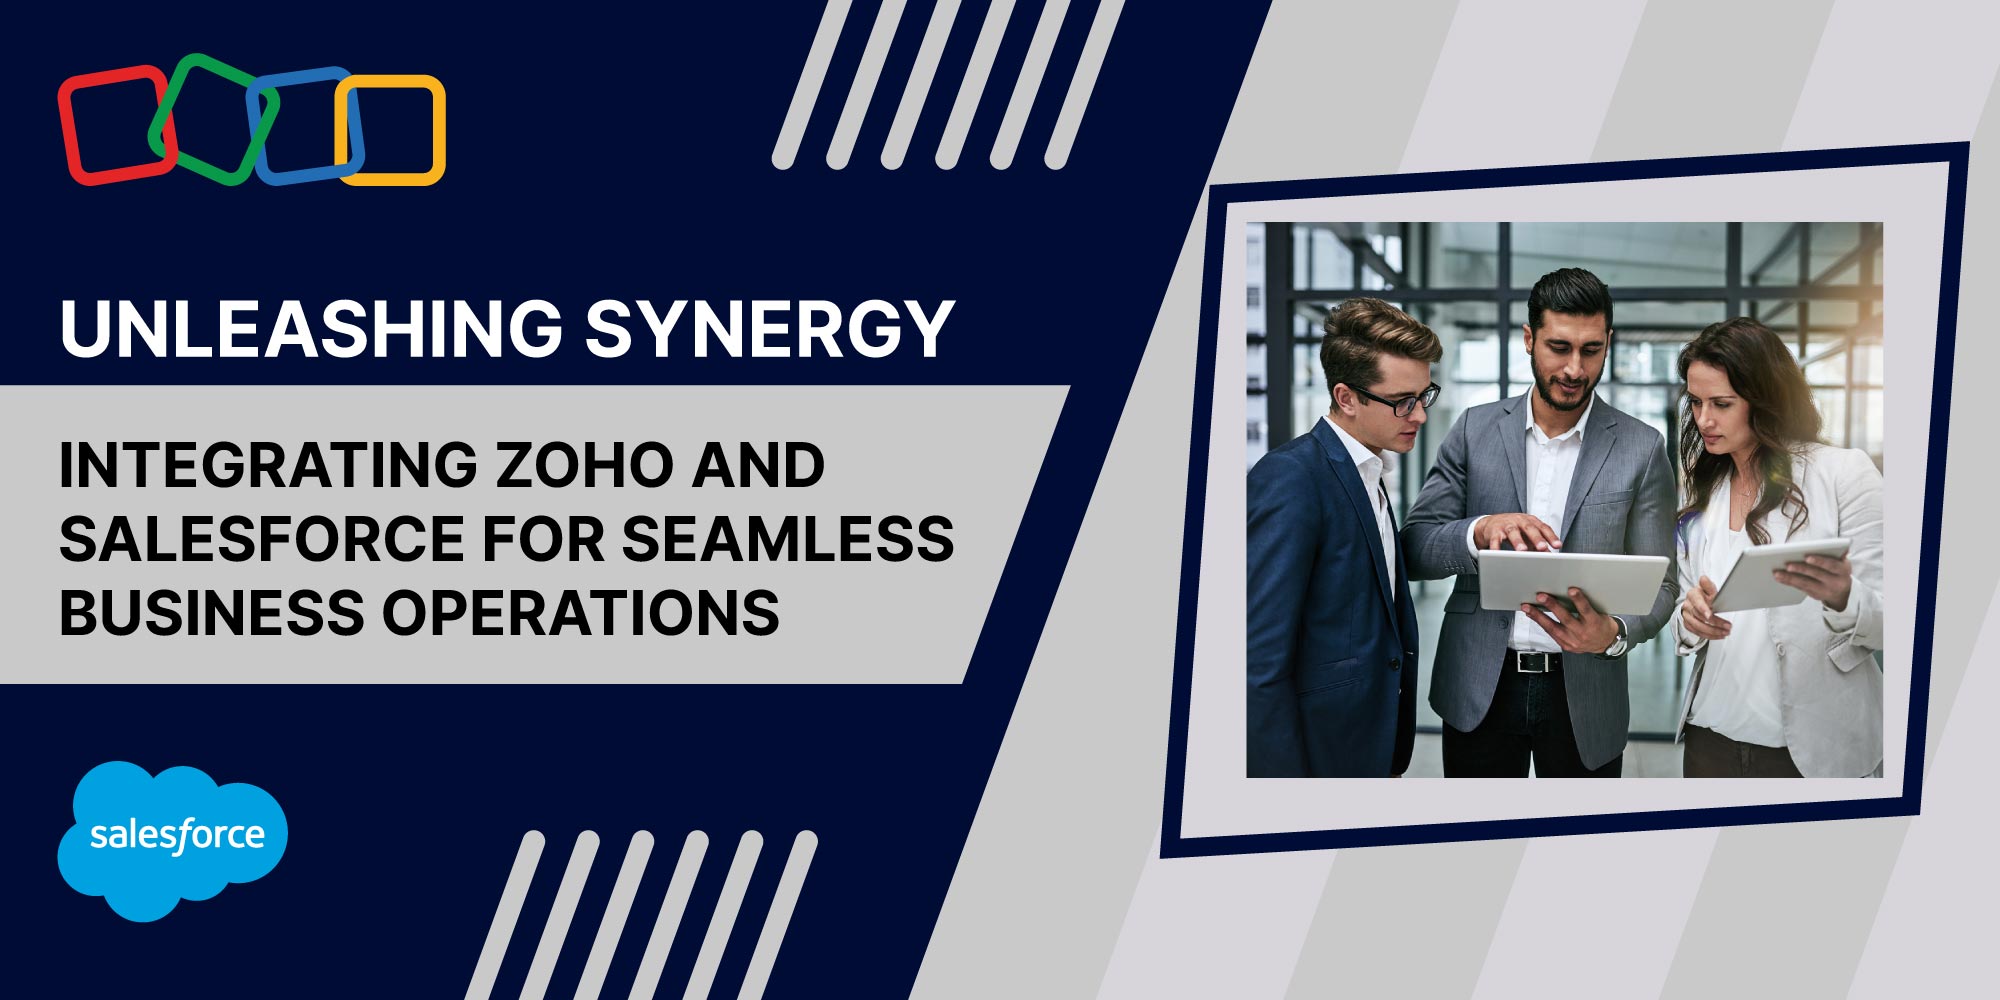 Unleashing synergy integrating zoho and salesforce for seamless business operations